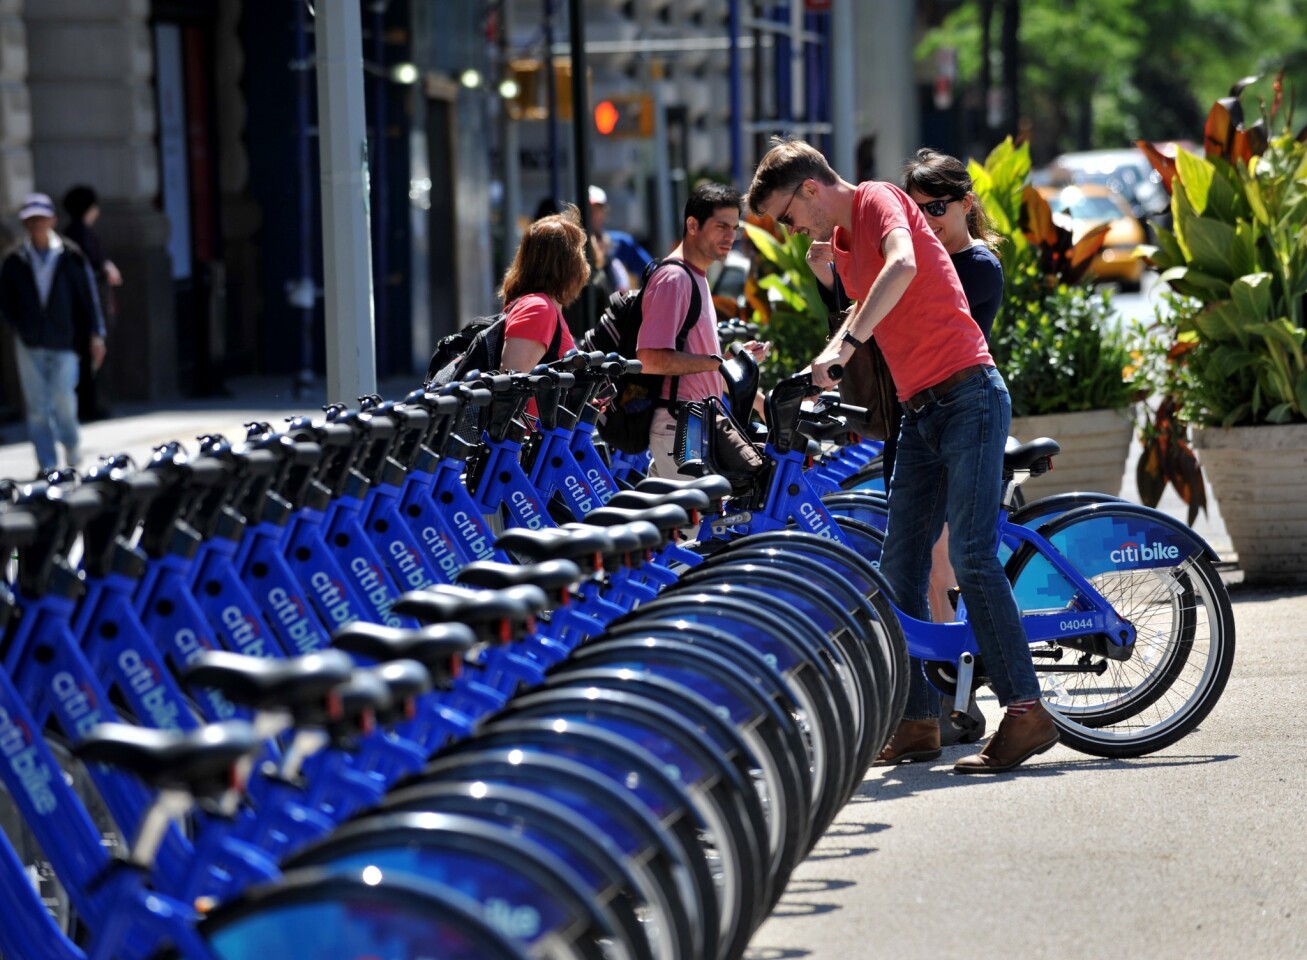 Among other benefits, New York's bike-share system is great for 2-wheeled architecture tours. Too bad L.A.'s is stalled.